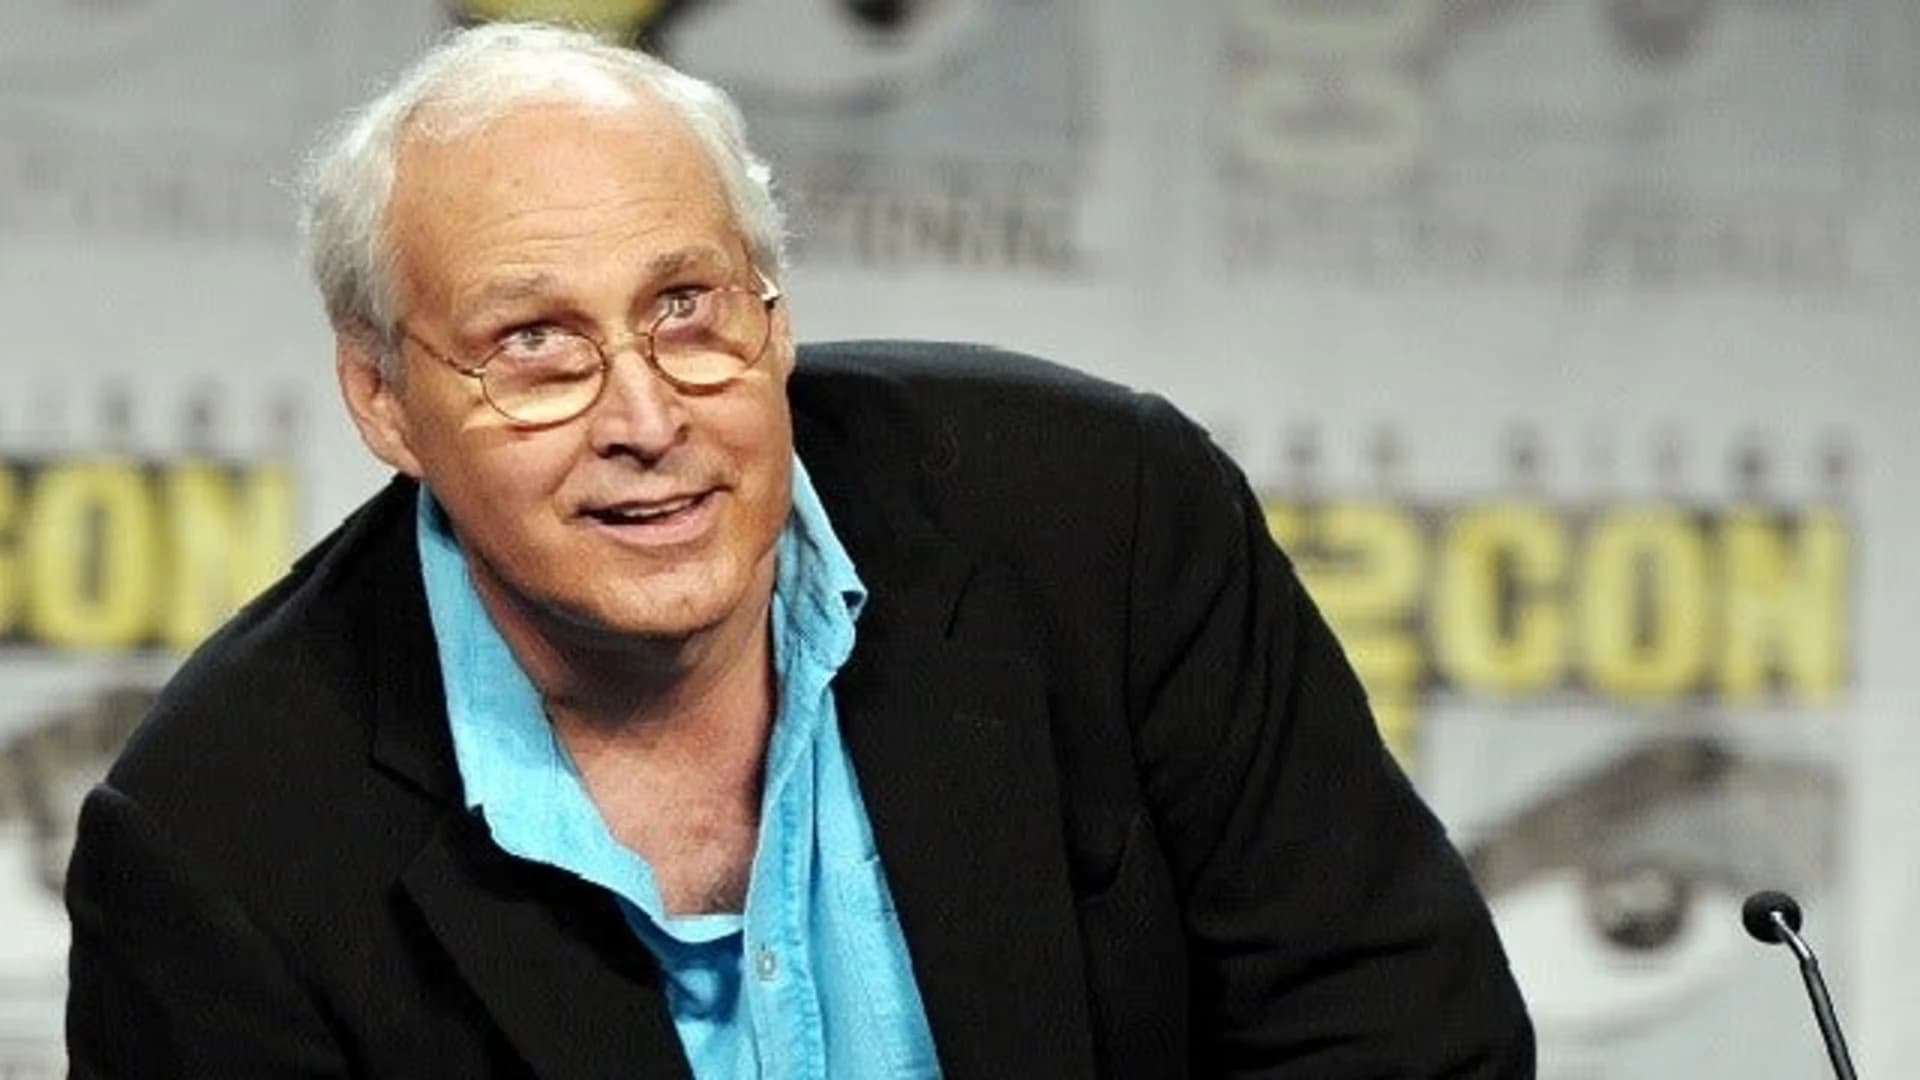 Cops: Chevy Chase kicked in roadside altercation in New York